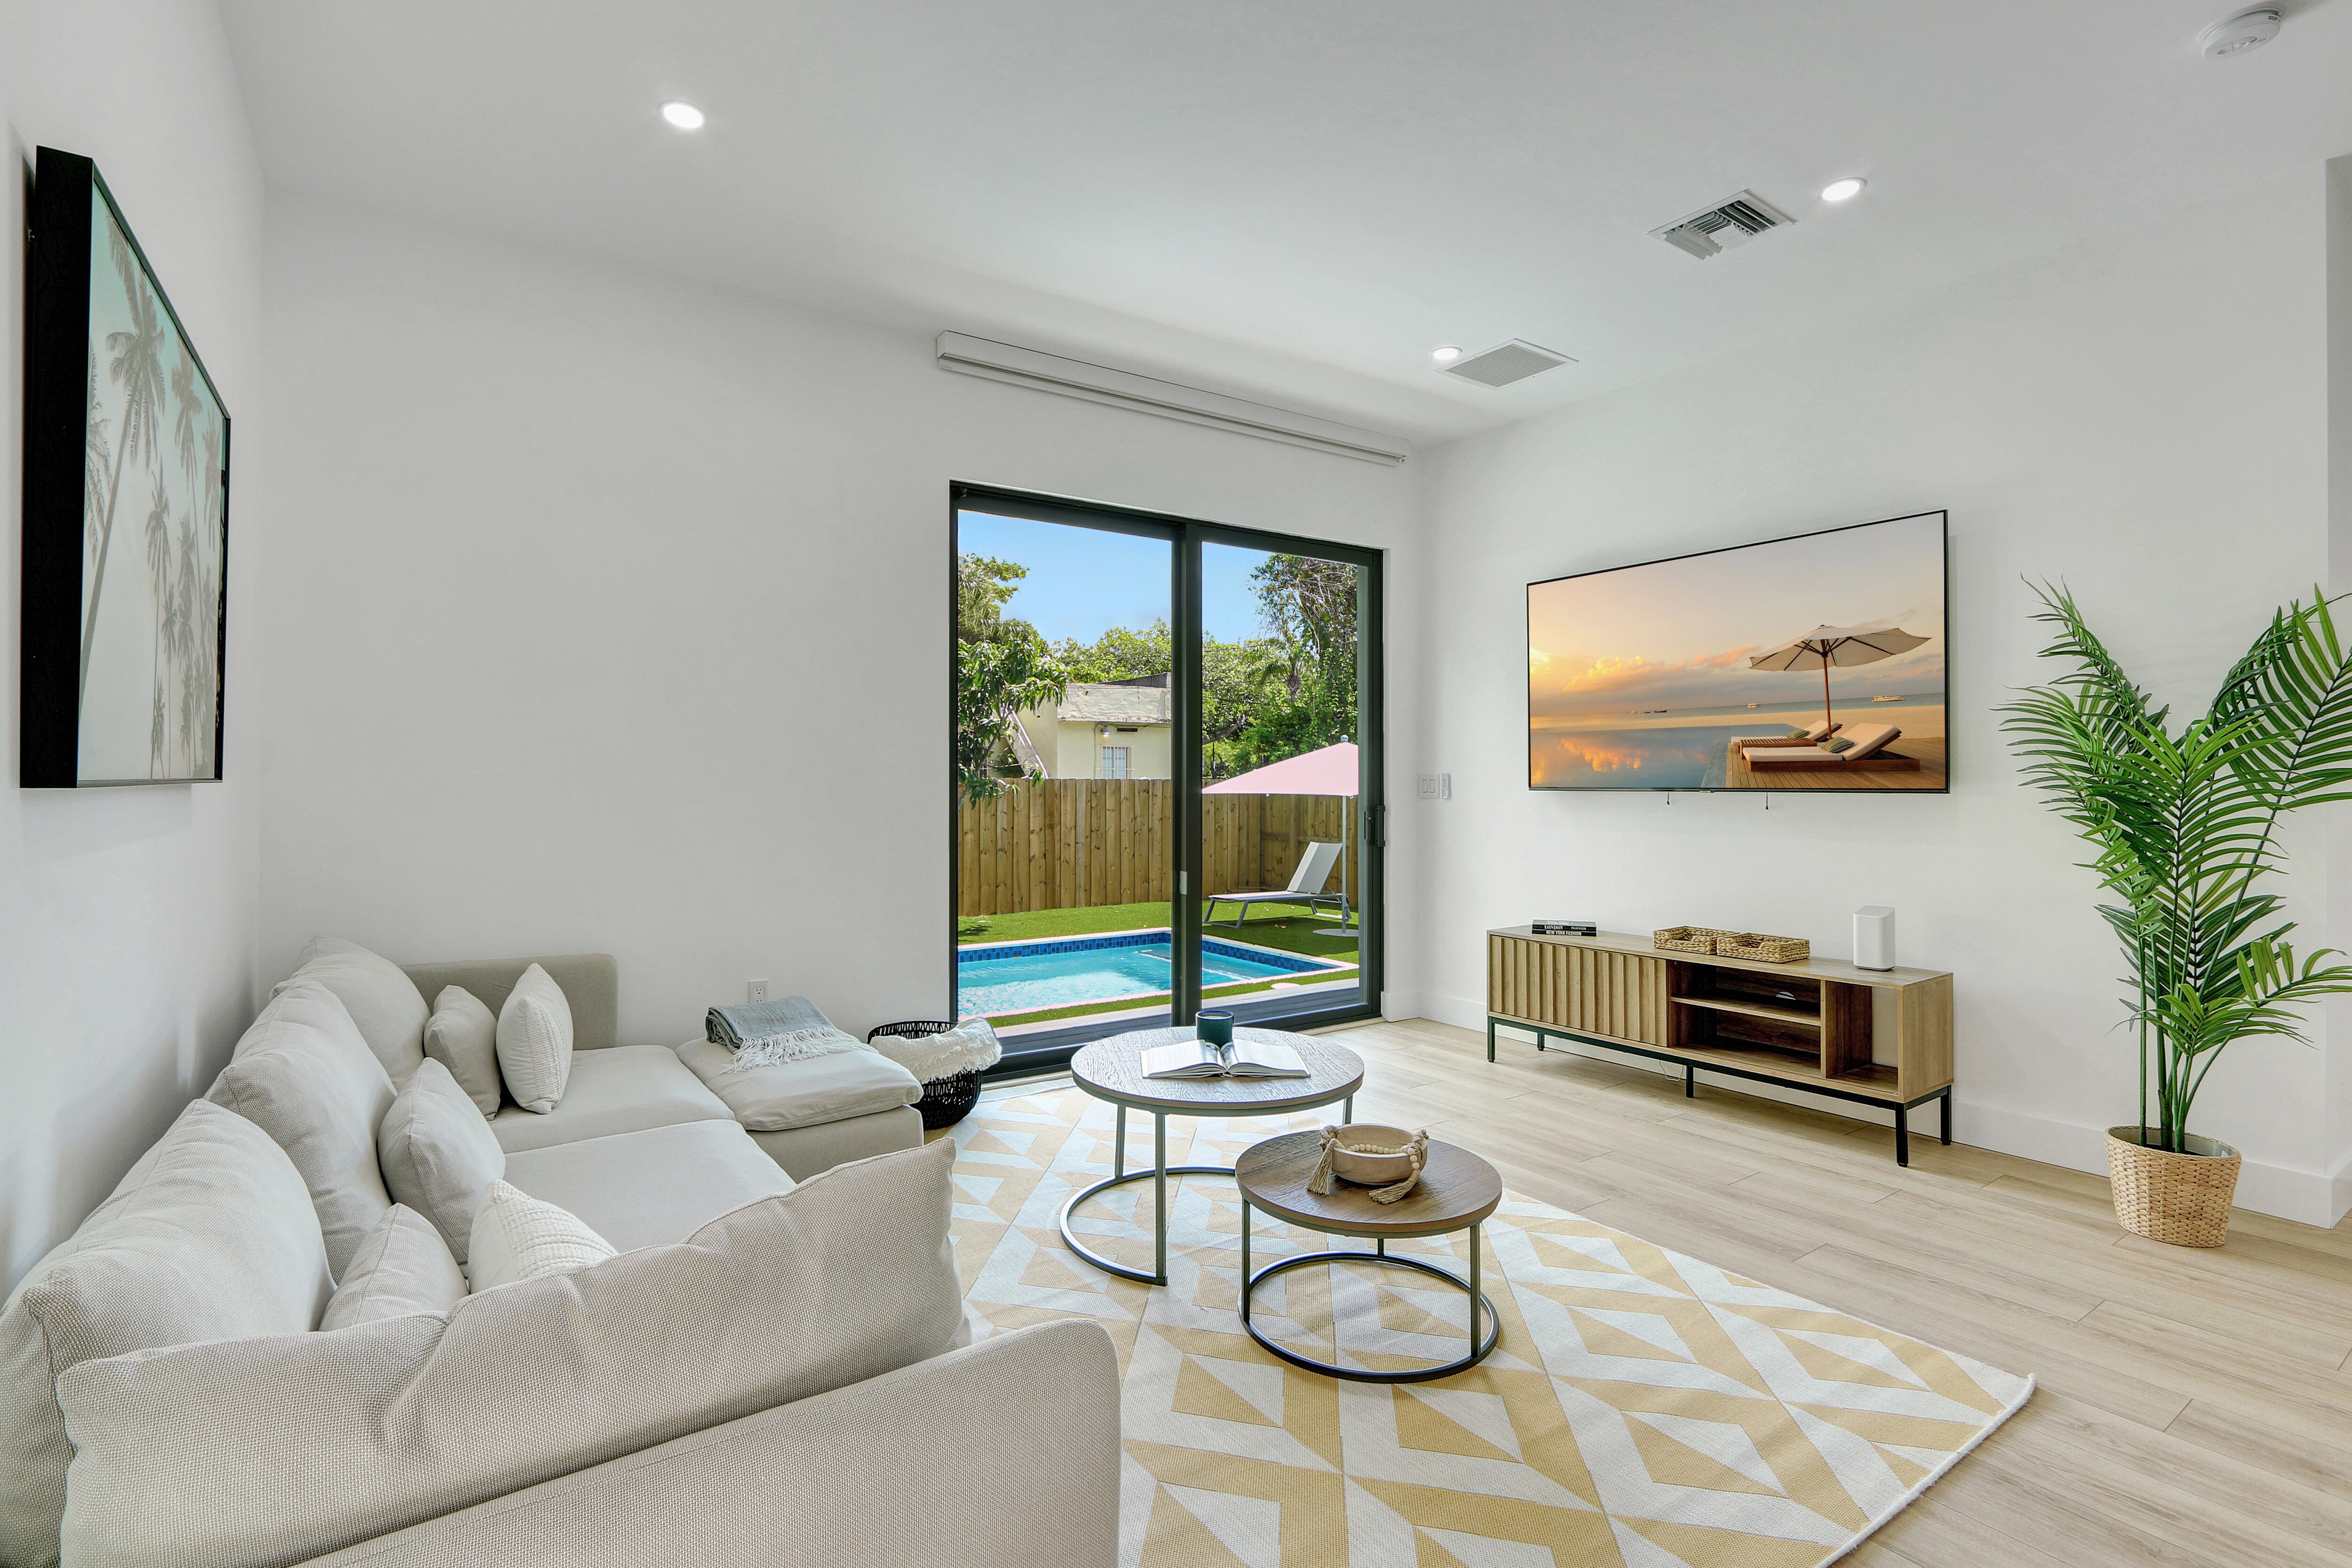 Property Image 2 - Serenity: Brand New Construction, Modern, Pool, by NewmanHospitality